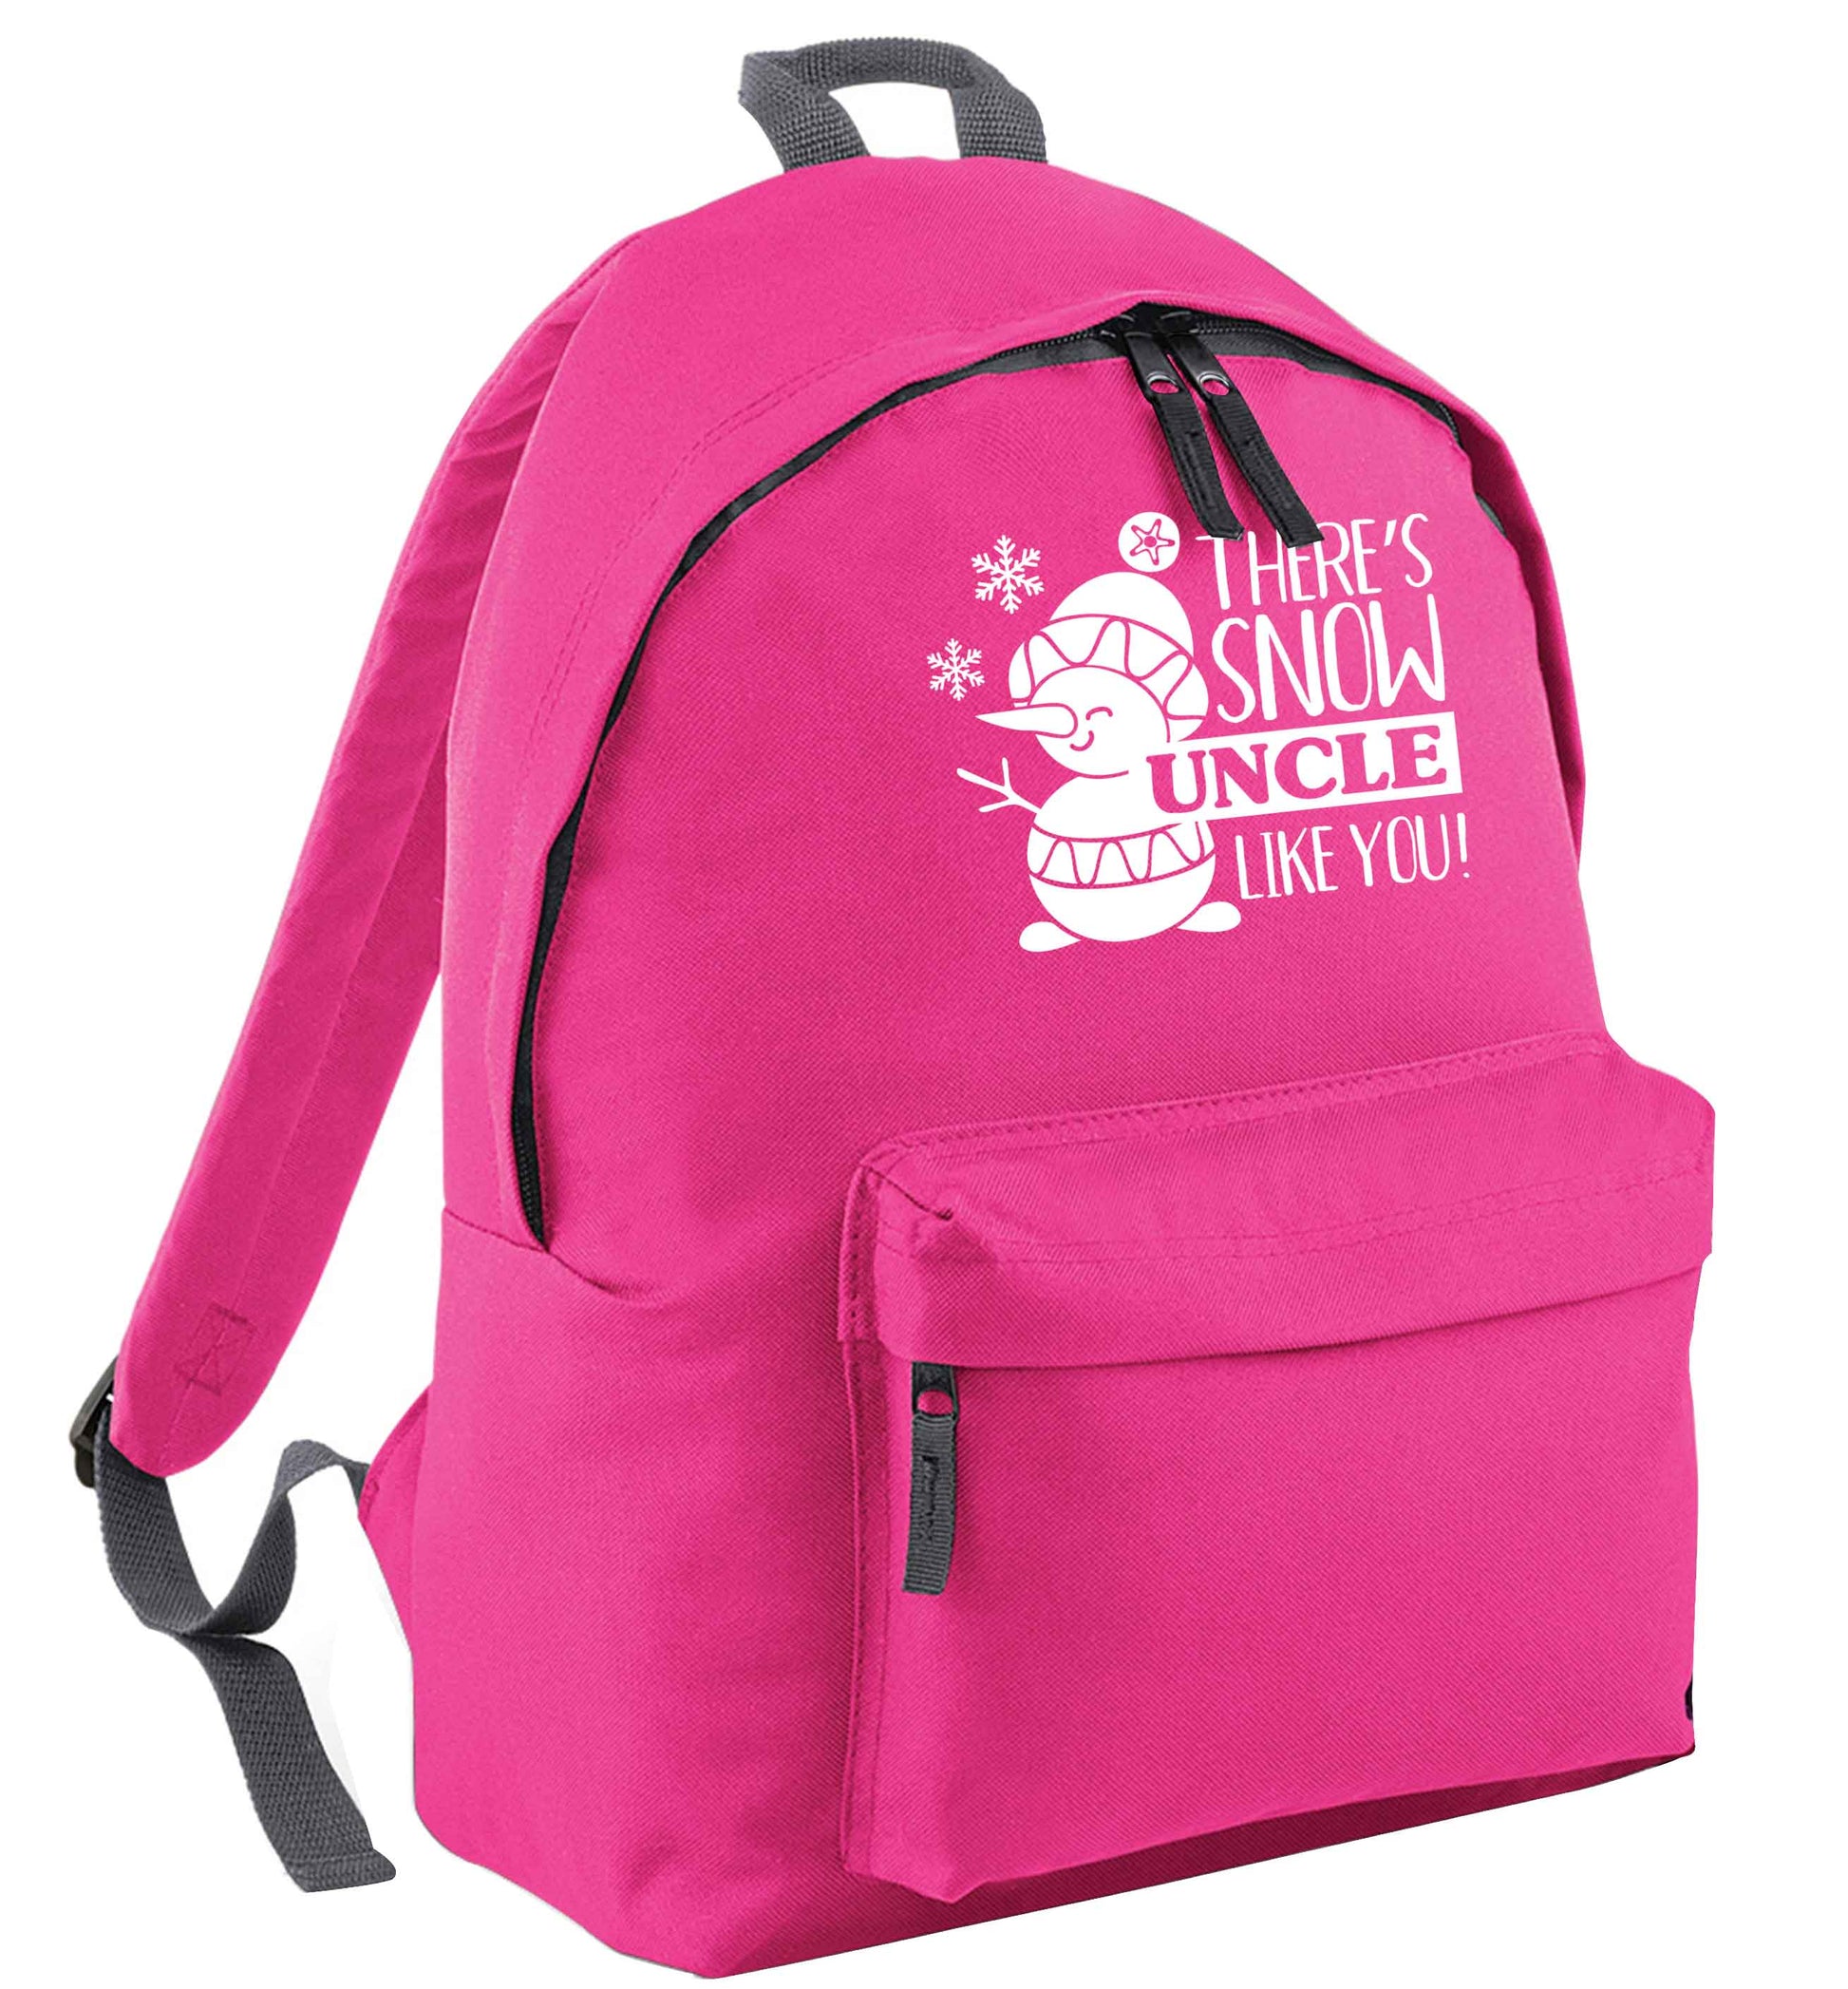 There's snow uncle like you pink adults backpack